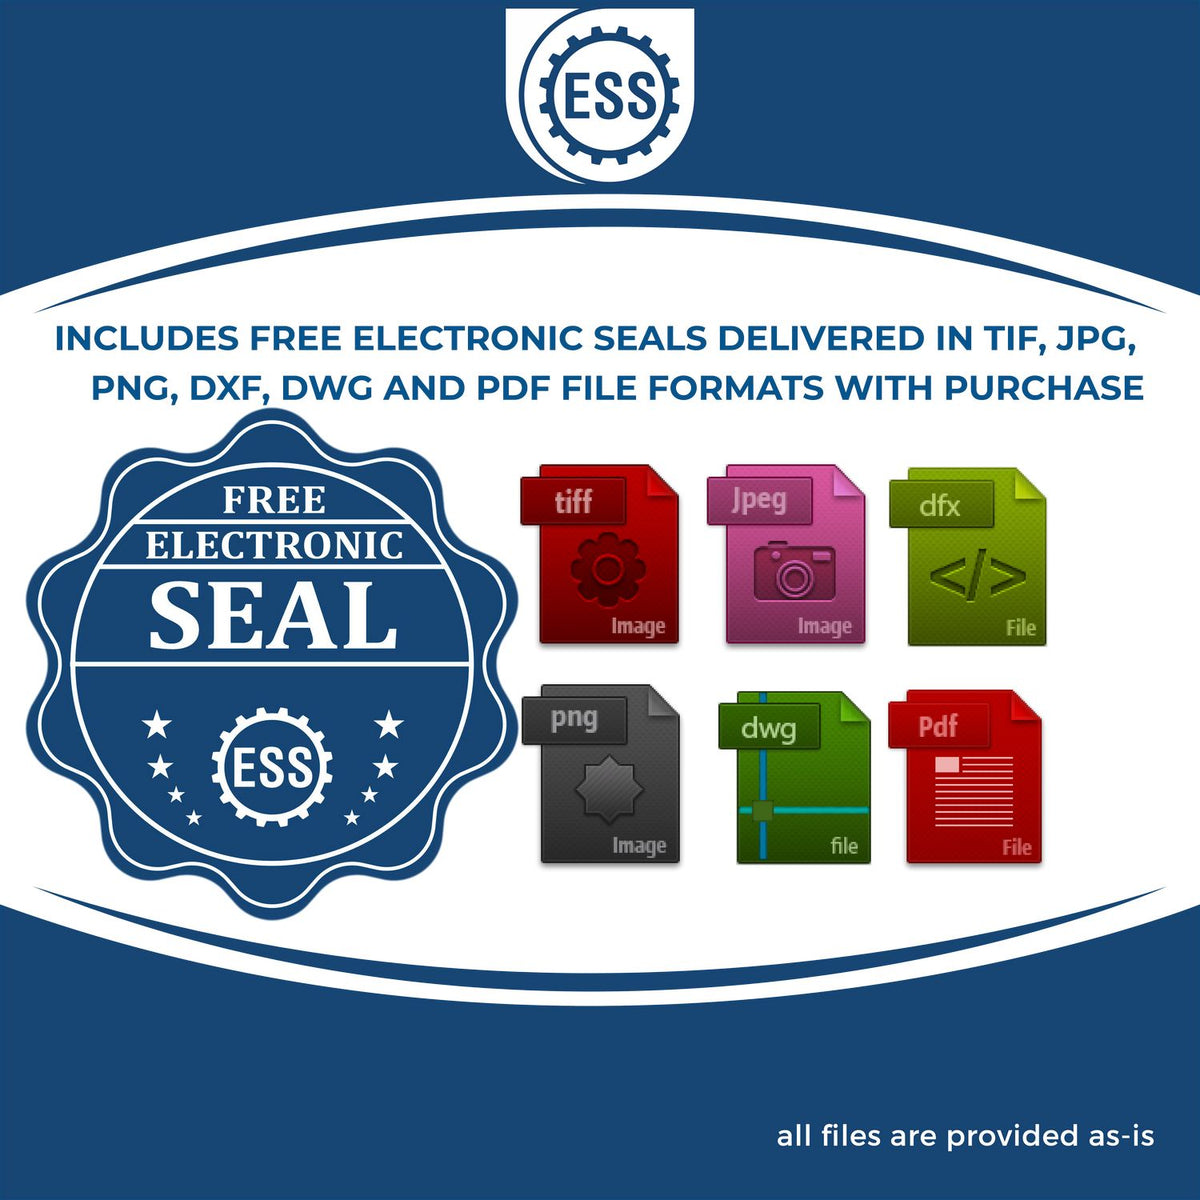 An infographic for the free electronic seal for the Slim Pre-Inked Georgia Professional Geologist Seal Stamp illustrating the different file type icons such as DXF, DWG, TIF, JPG and PNG.